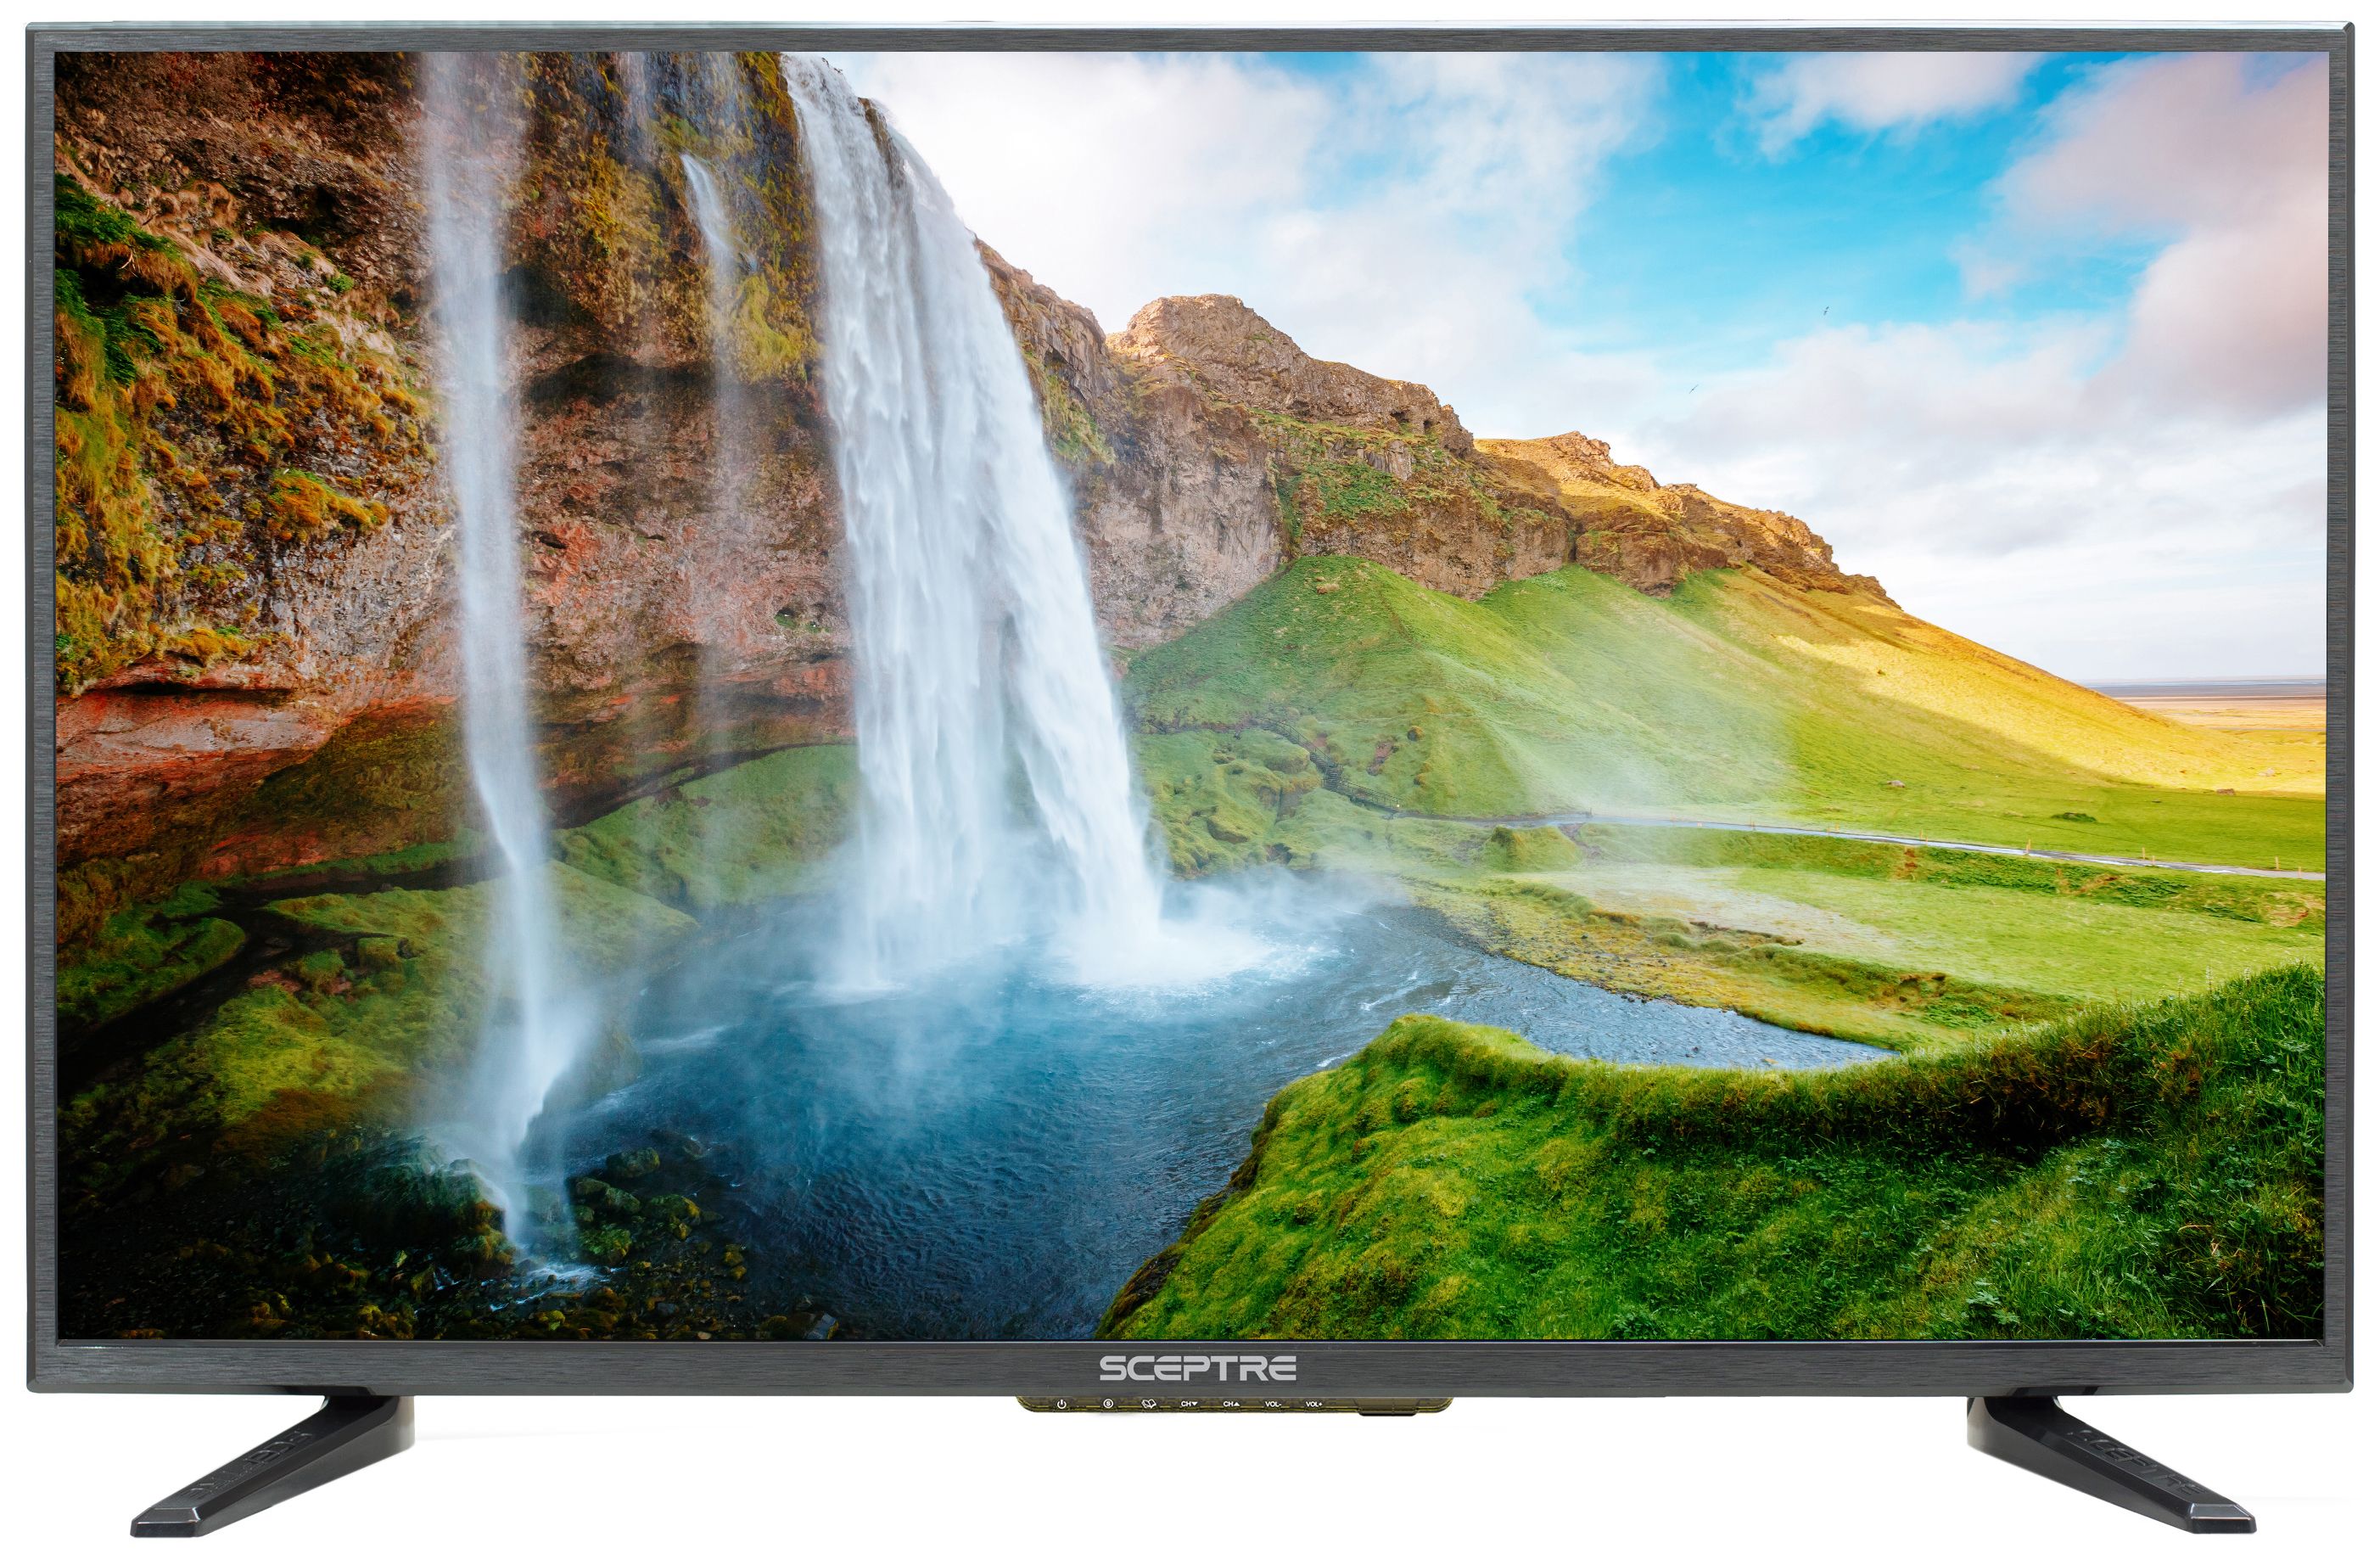 Sceptre 32-in Class FHD LED TV...